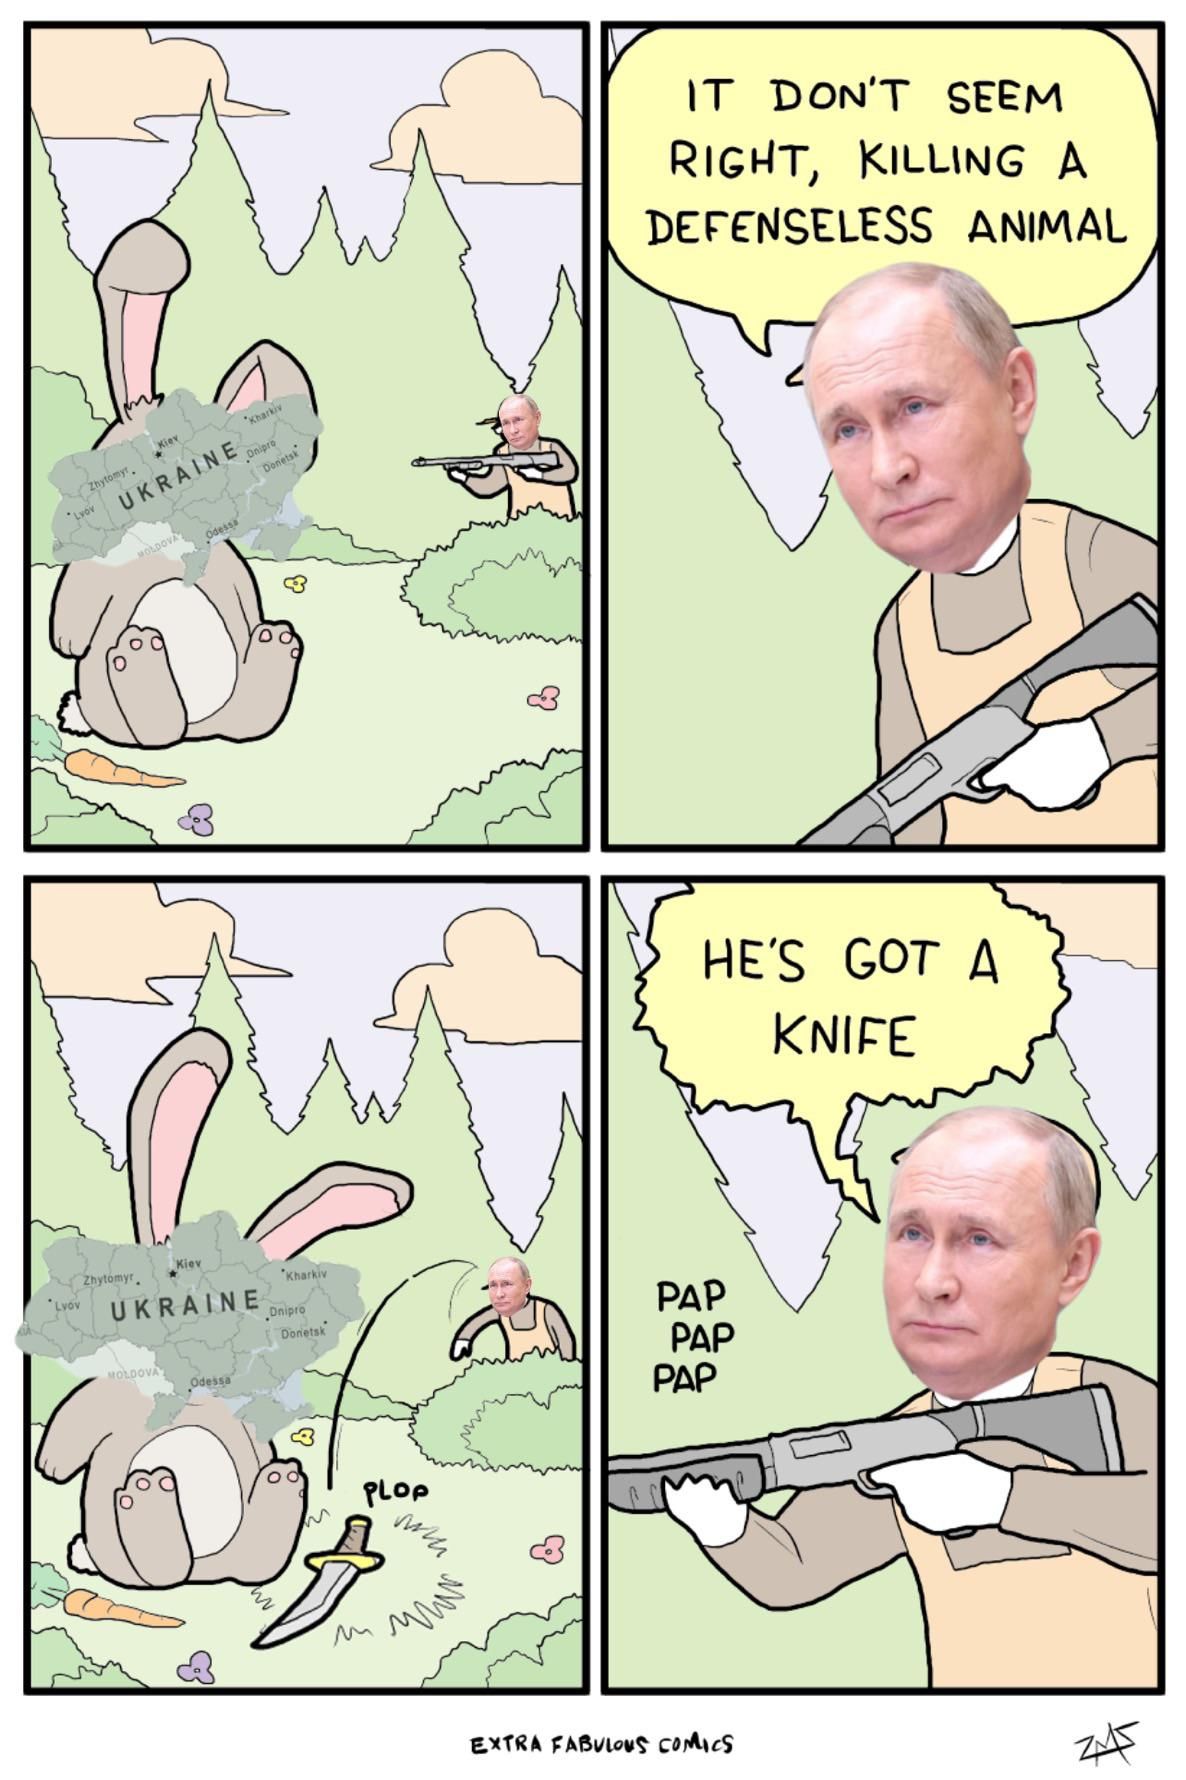 Just Putin this here for you